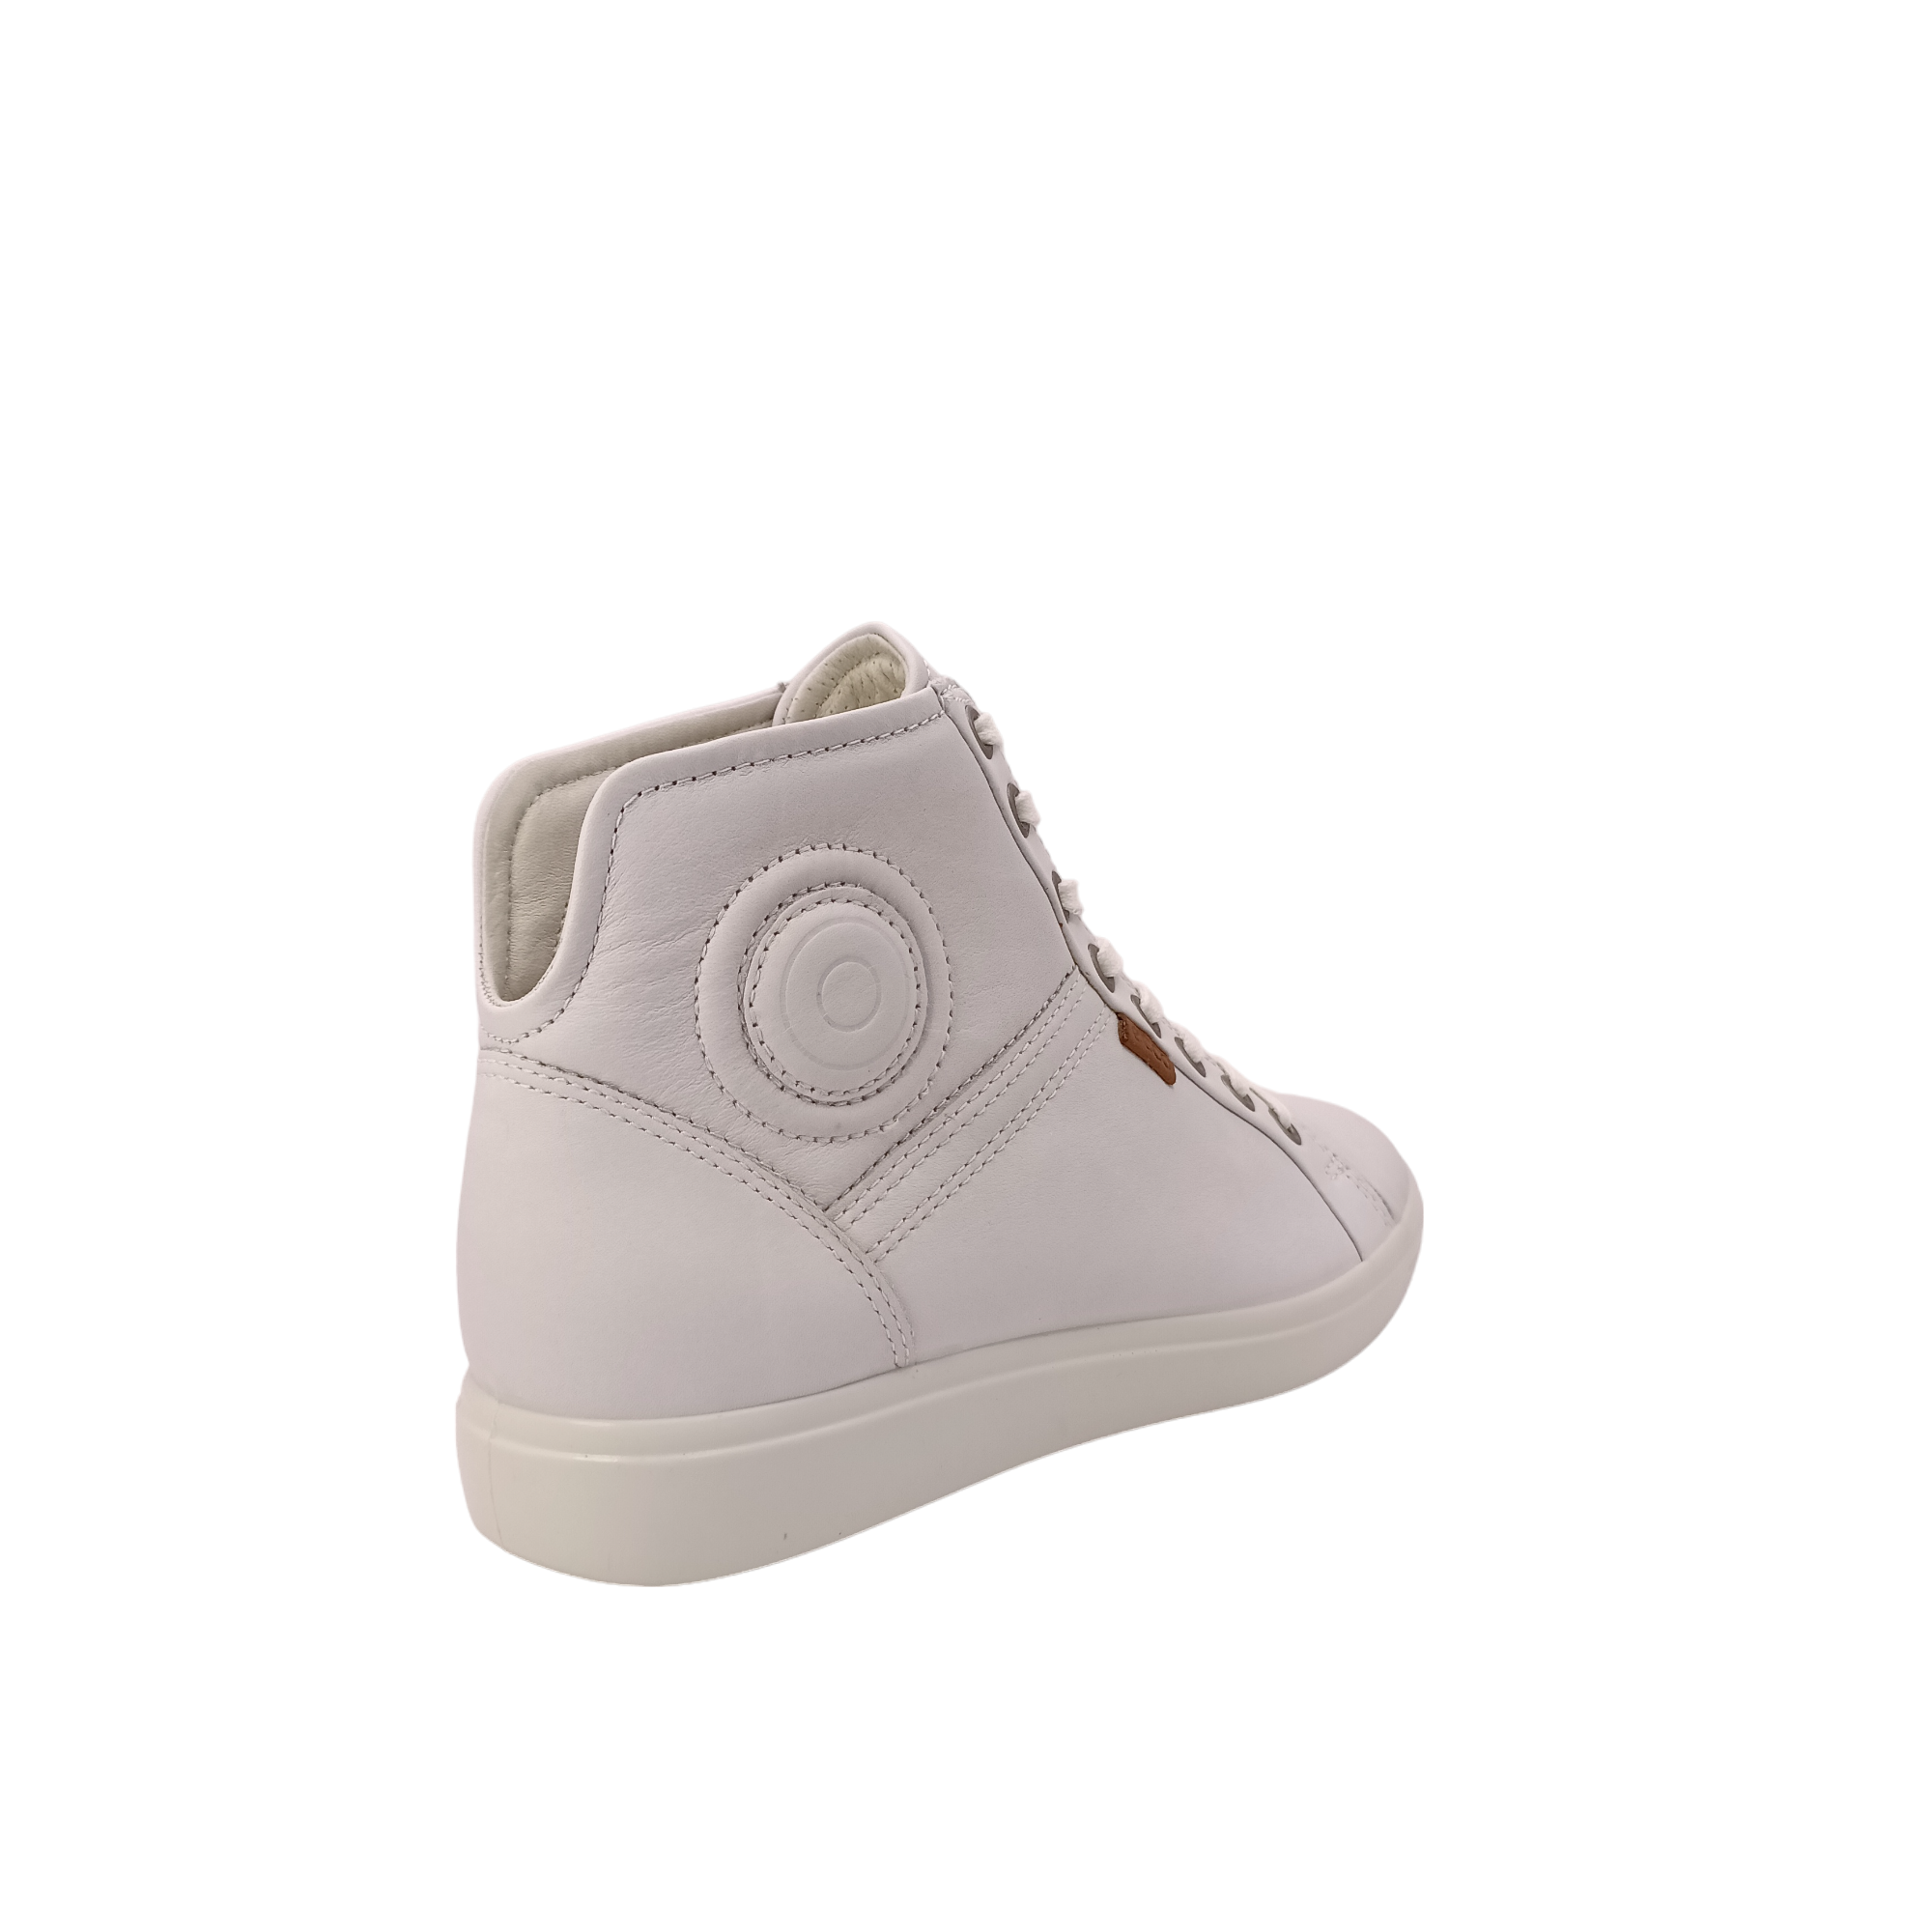 White Circle pattern on side top with a v shape heel Shop Womens Hi-cut white sneaker from Ecco.  View of side white leather sneaker with white laces. Shop shoe&amp;me Mount Maunganui NZ.